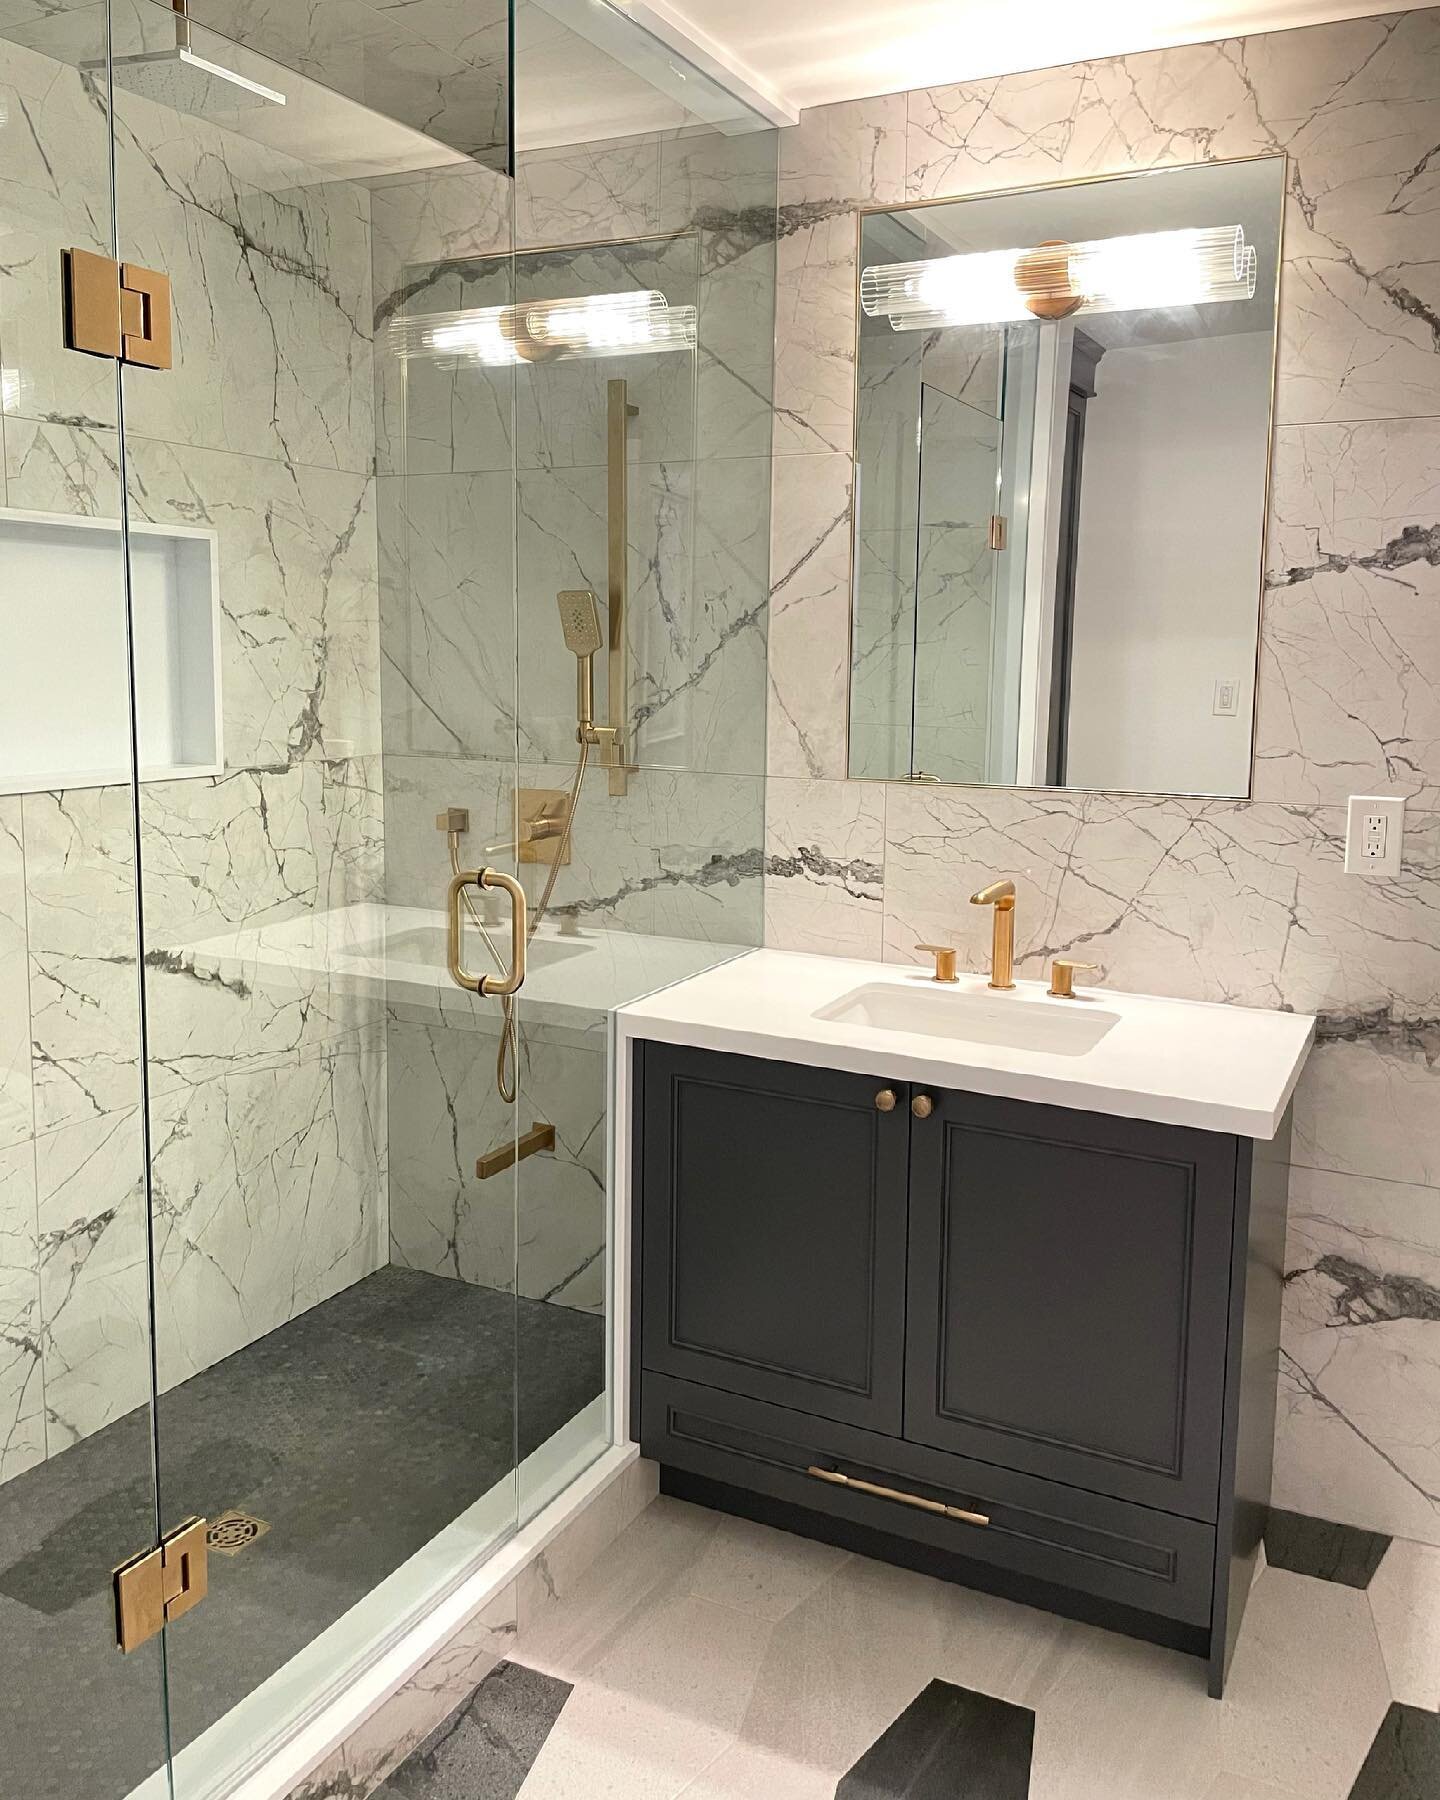 ✨Bathroom Goals!✨

This full basement renovation is almost complete! We are so excited to share every inch of this beautiful space but for now, here is a look into this stunning bathroom.

#LivInteriors #TorontoInteriorDesign #TorontoInteriorDesigner